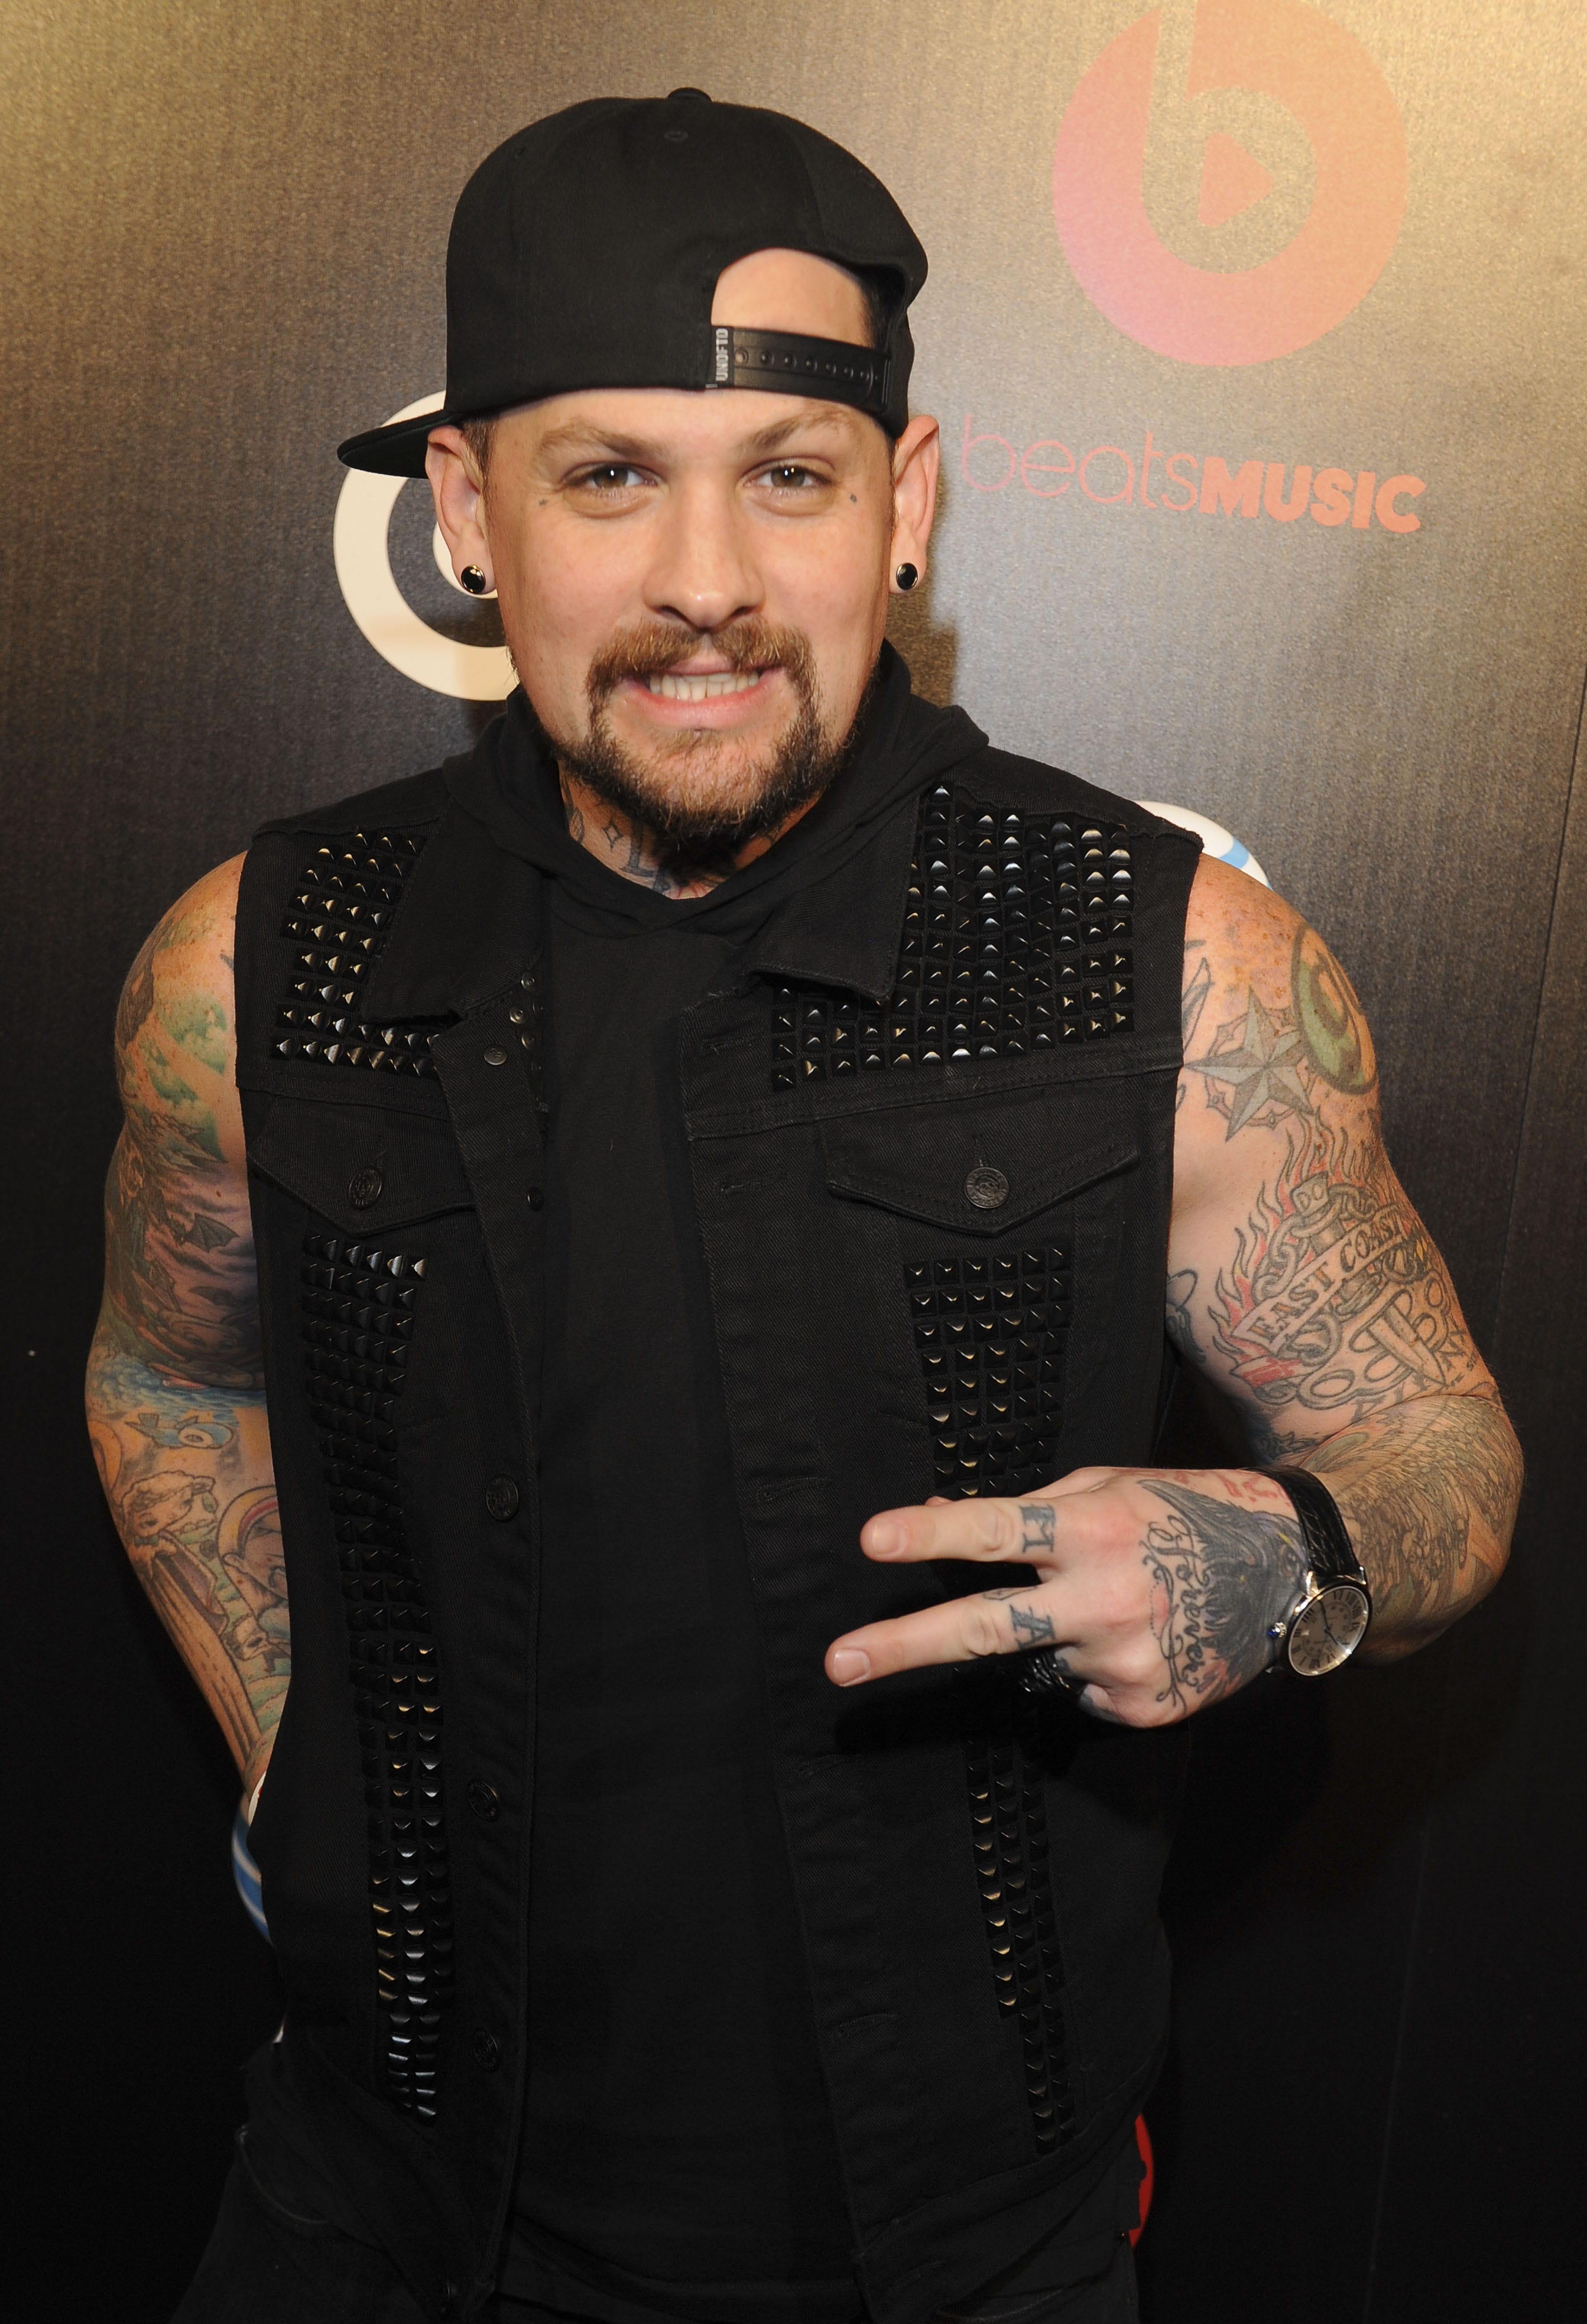 Cameron Diaz Married Benji Madden 5 Things to Know About the Rocker  ABC  News